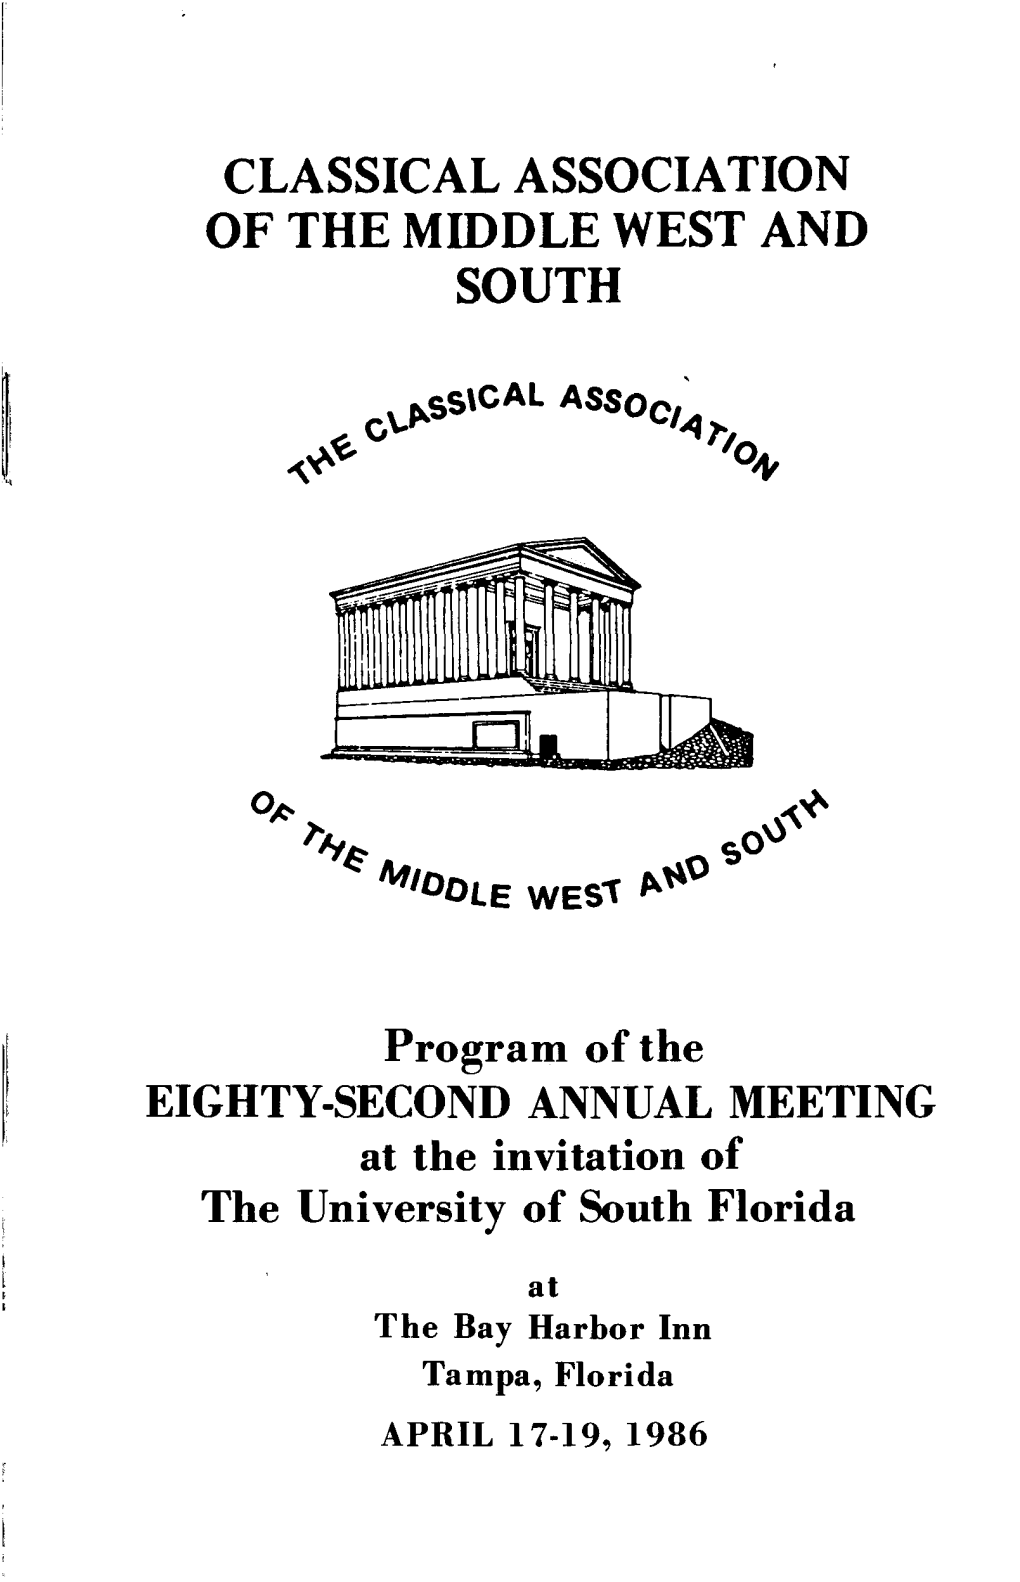 82Nd Annual Meeting